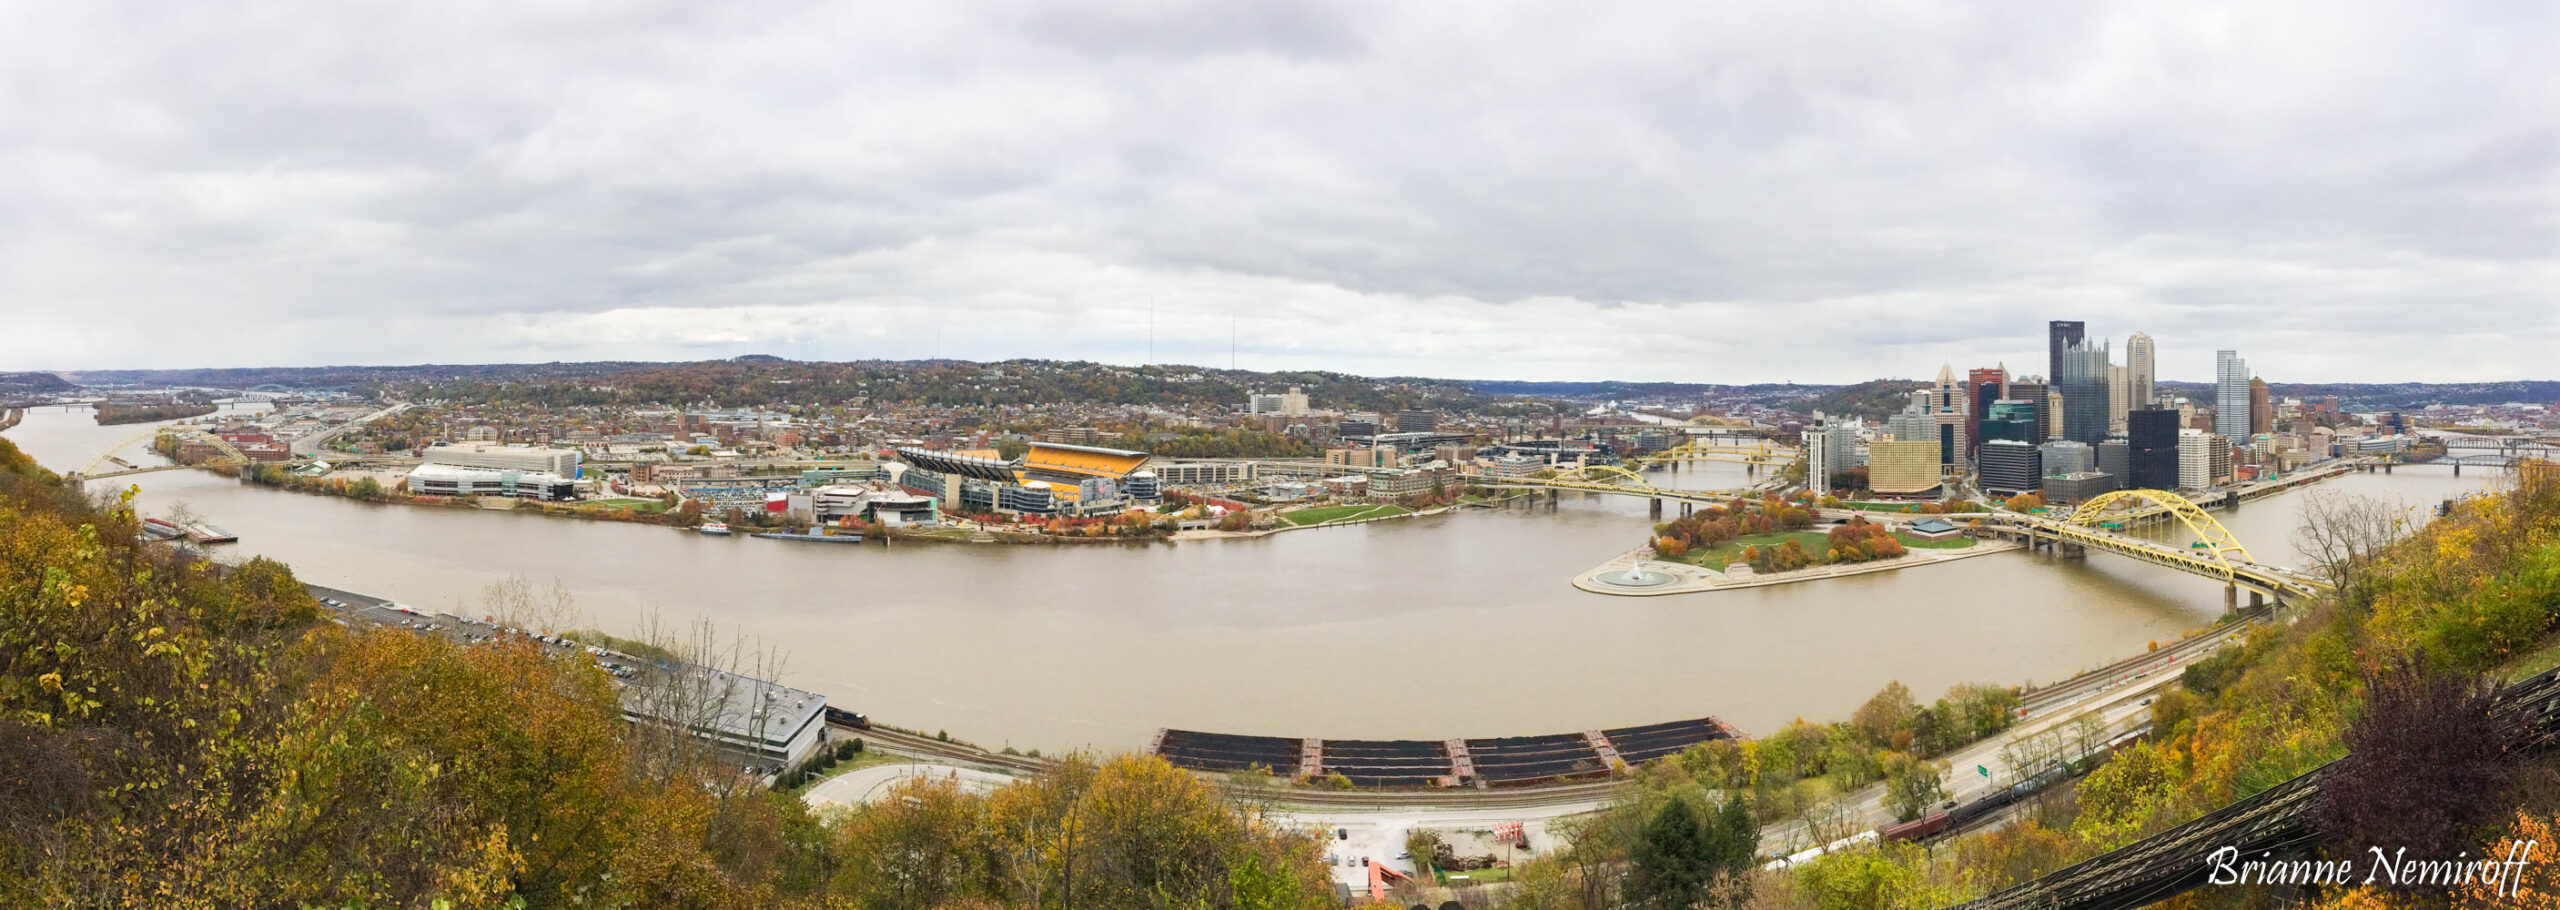 A panoramic view of the Pittsburgh skyline from the Duquesne Incline